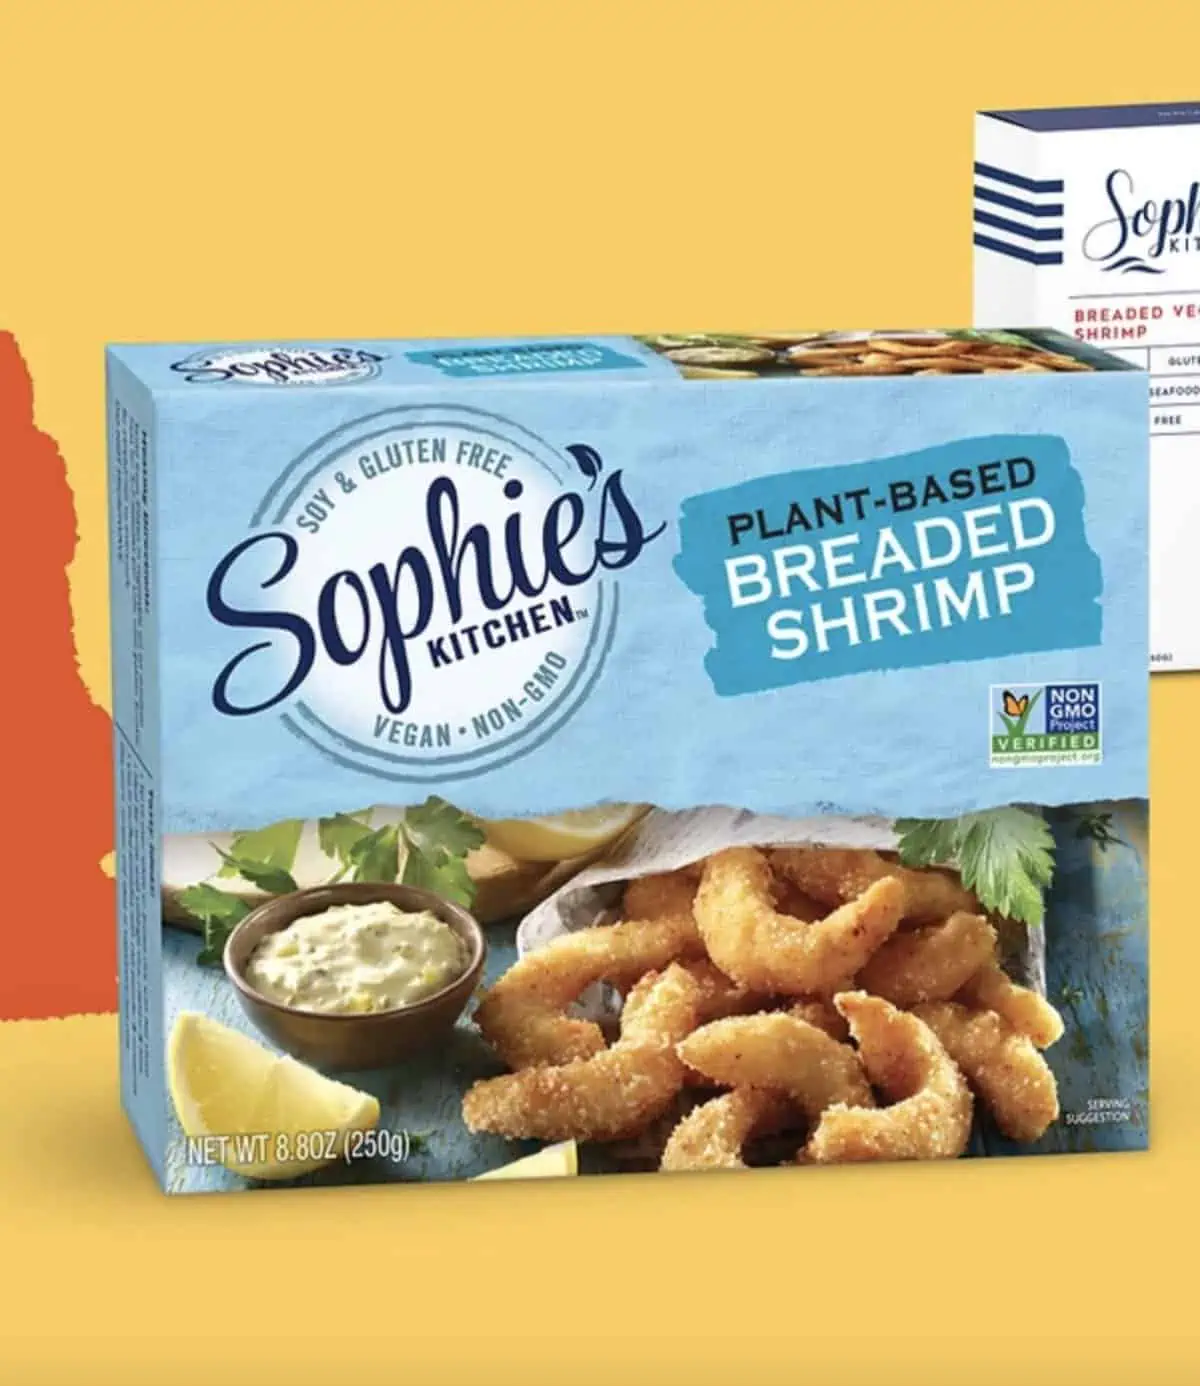 A box of frozen vegan shrimp from Sophie's Kitchen in their new updated packaging.